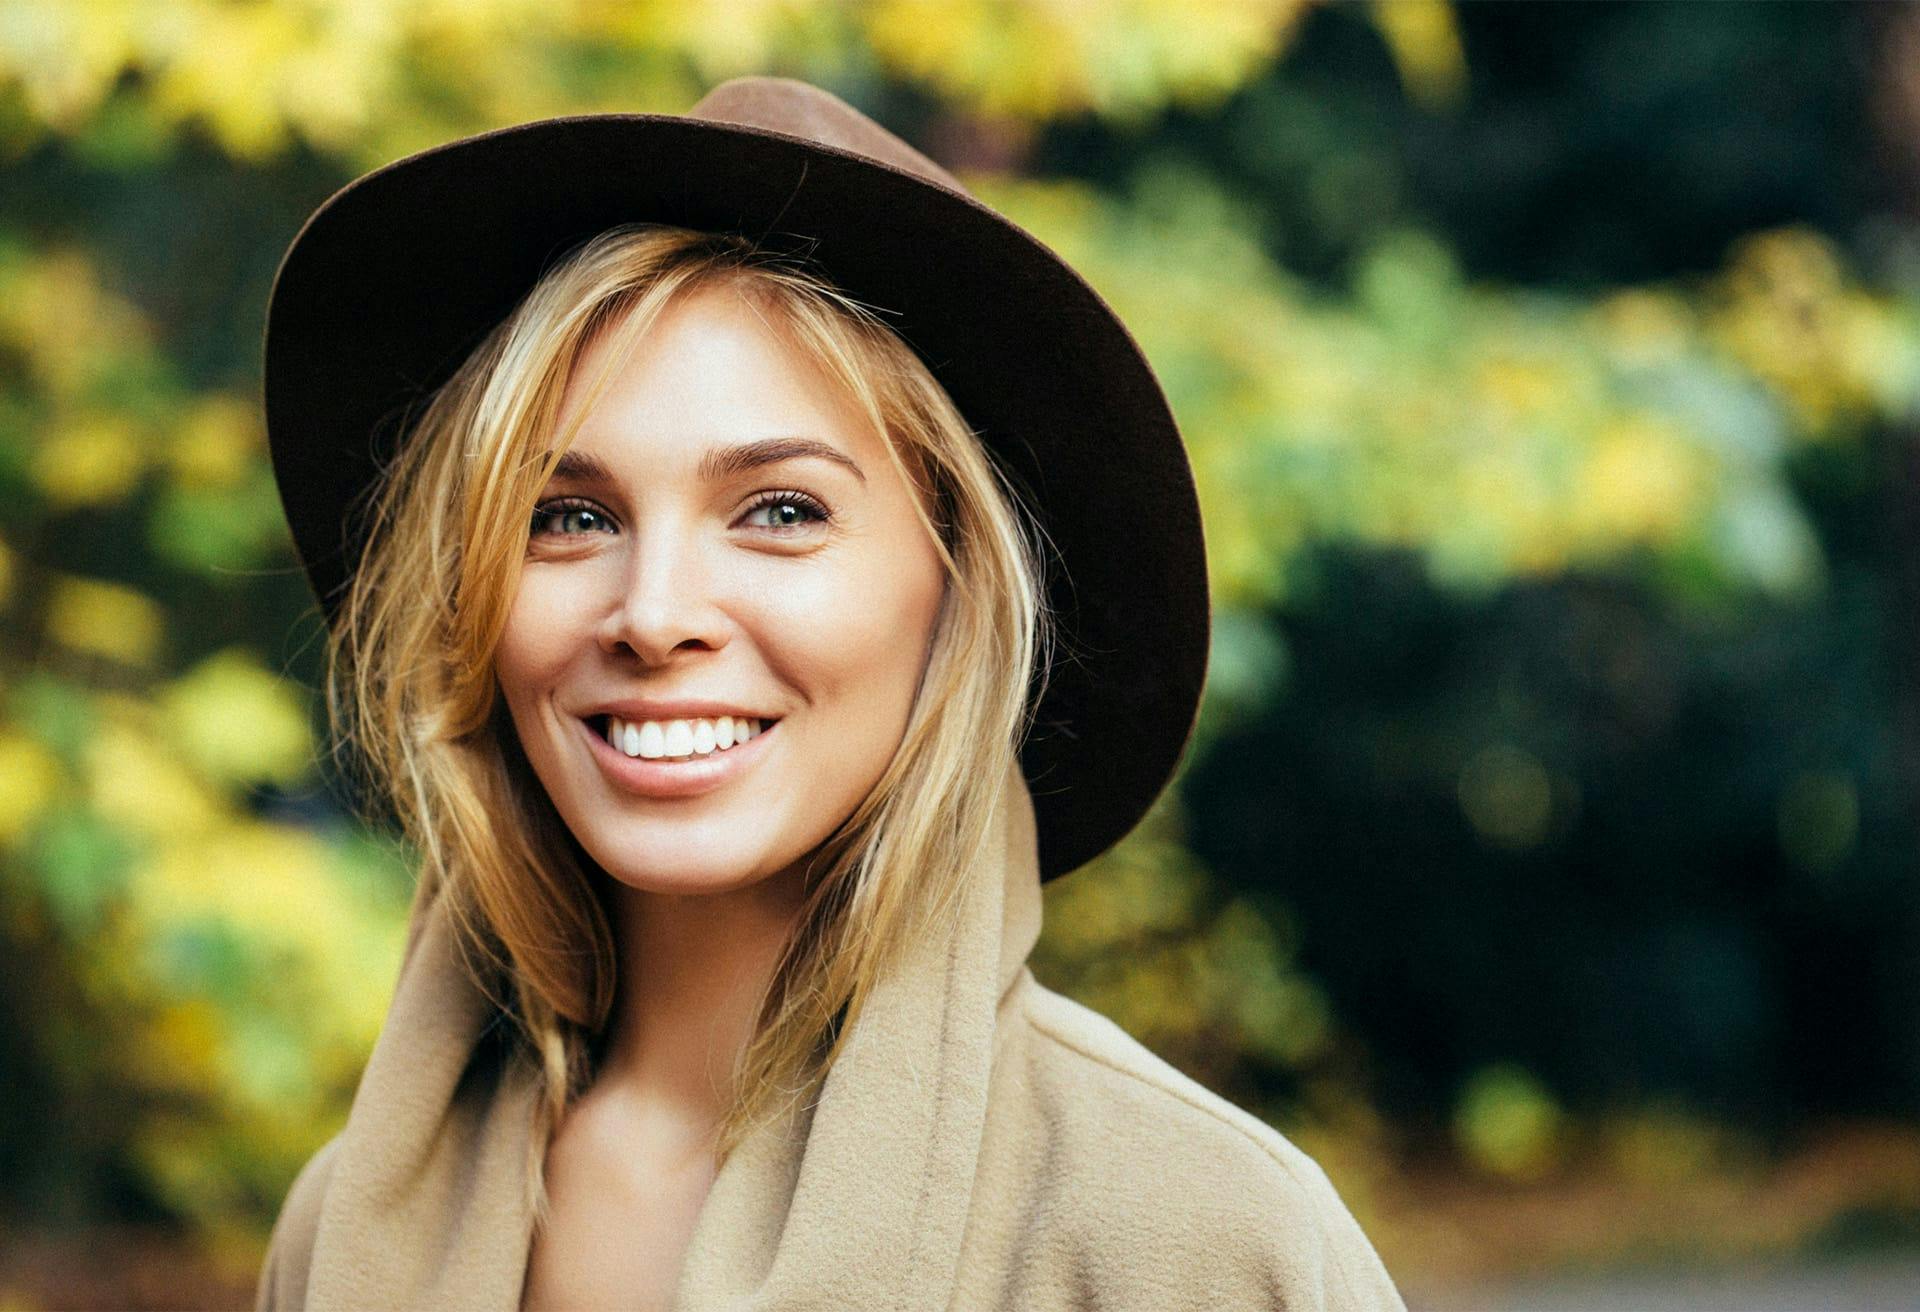 Woman wearing a hat smiling in front of foliage.